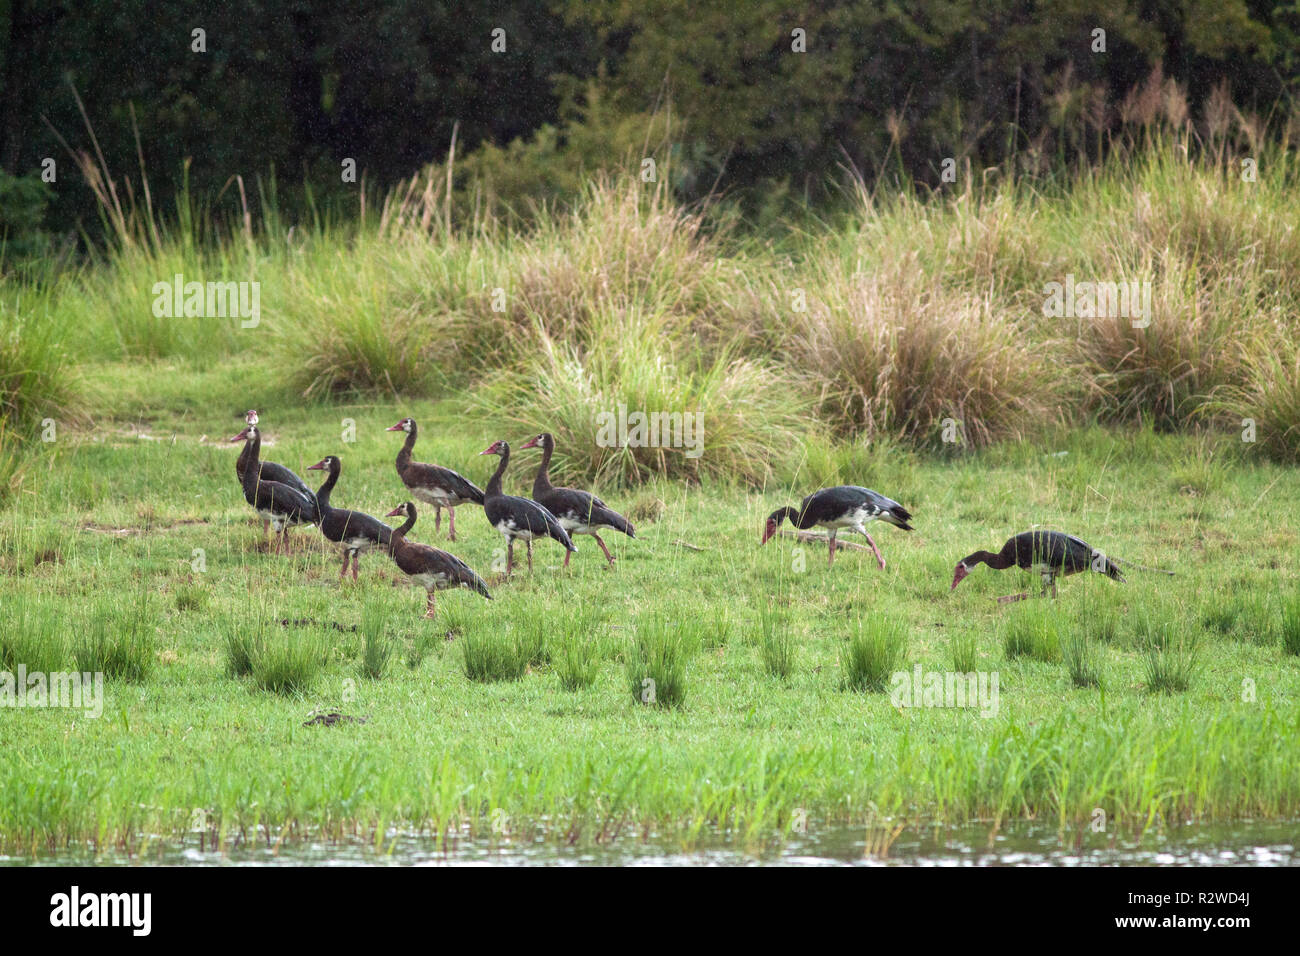 Black Spur-winged Goose (Plectropterus gambensis niger). Flock grazing, waters edge. Sub-species found south of the Zambesi. Here in Botswana. Africa. Stock Photo